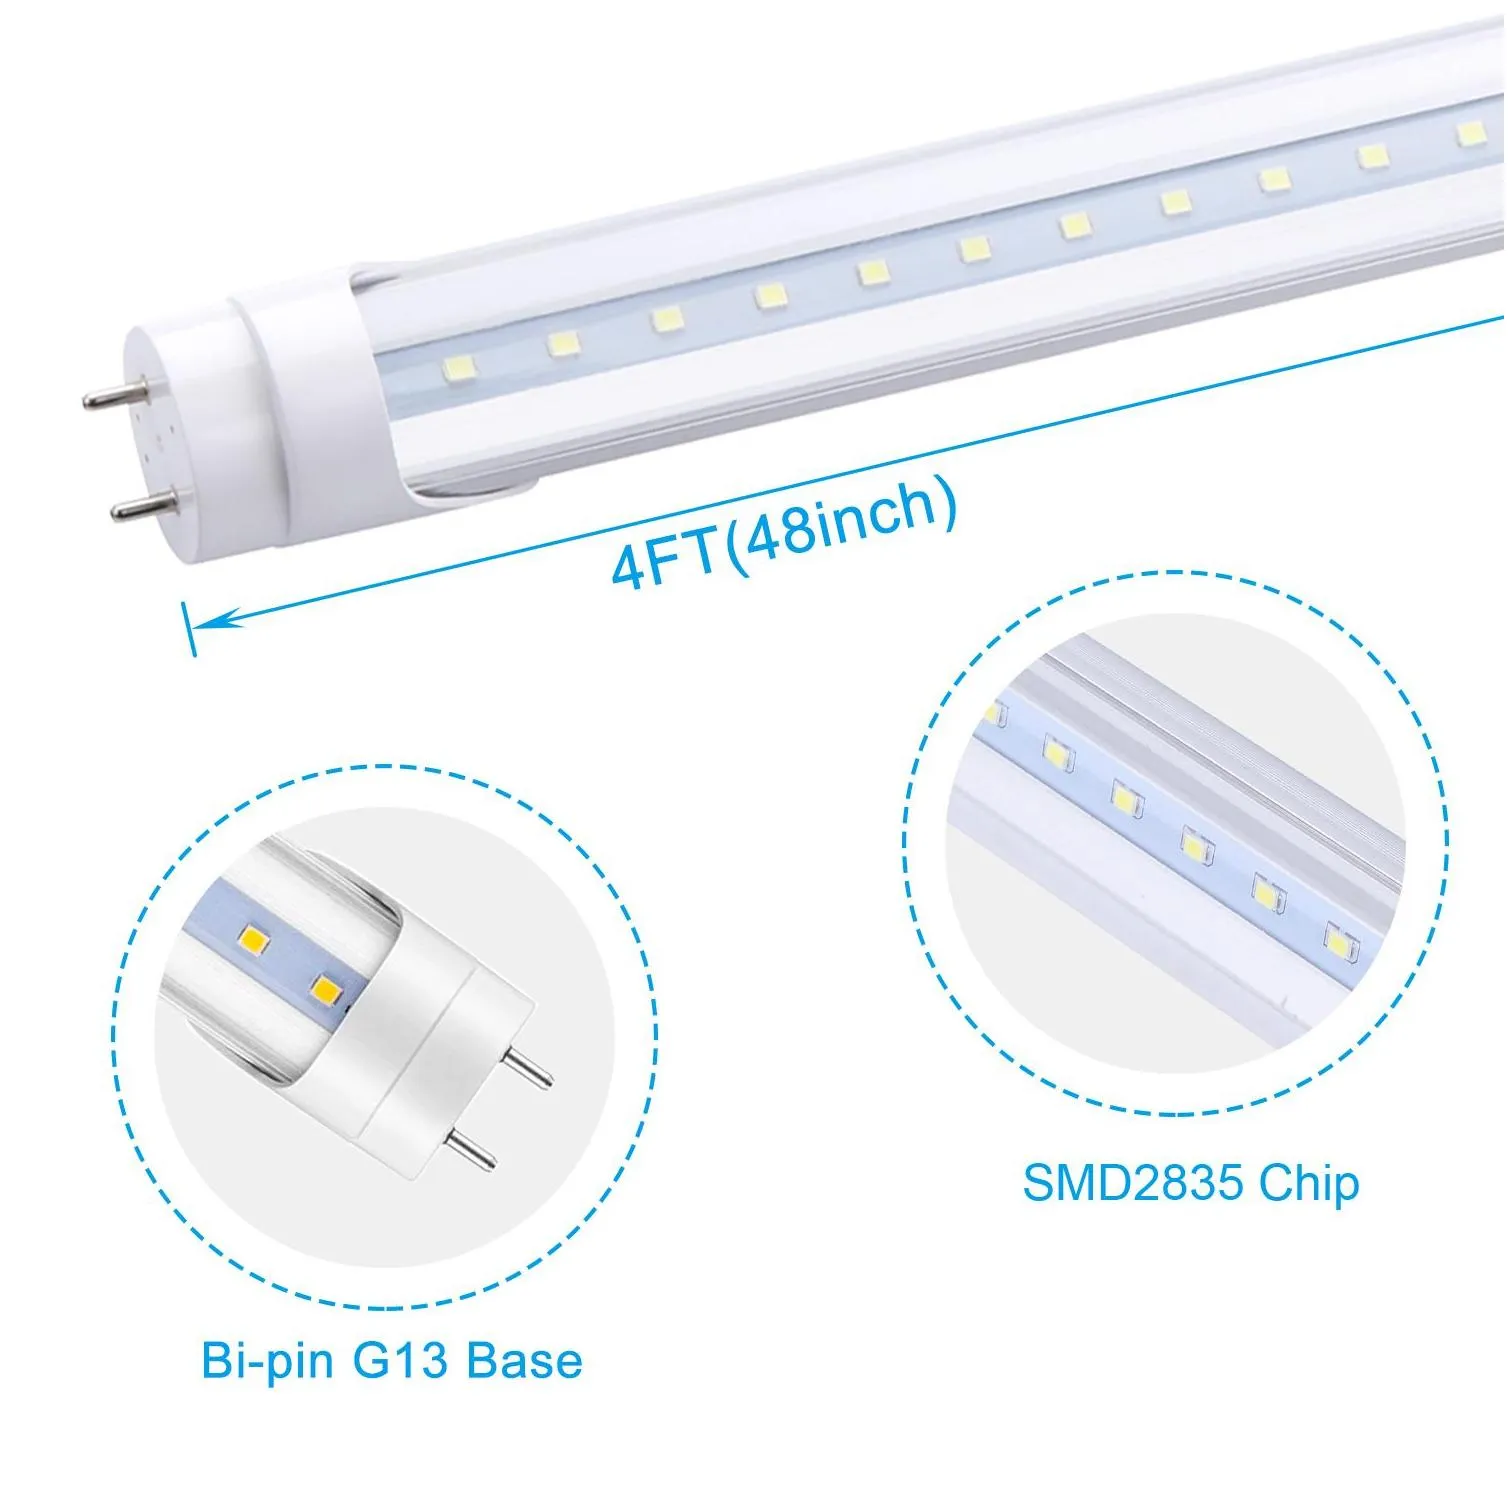 t8 led tube lighting 4ft 4 foot 18w 22w 28w smd 2835 fluorescent light replacement 6000k cool white shop lamp bulbs